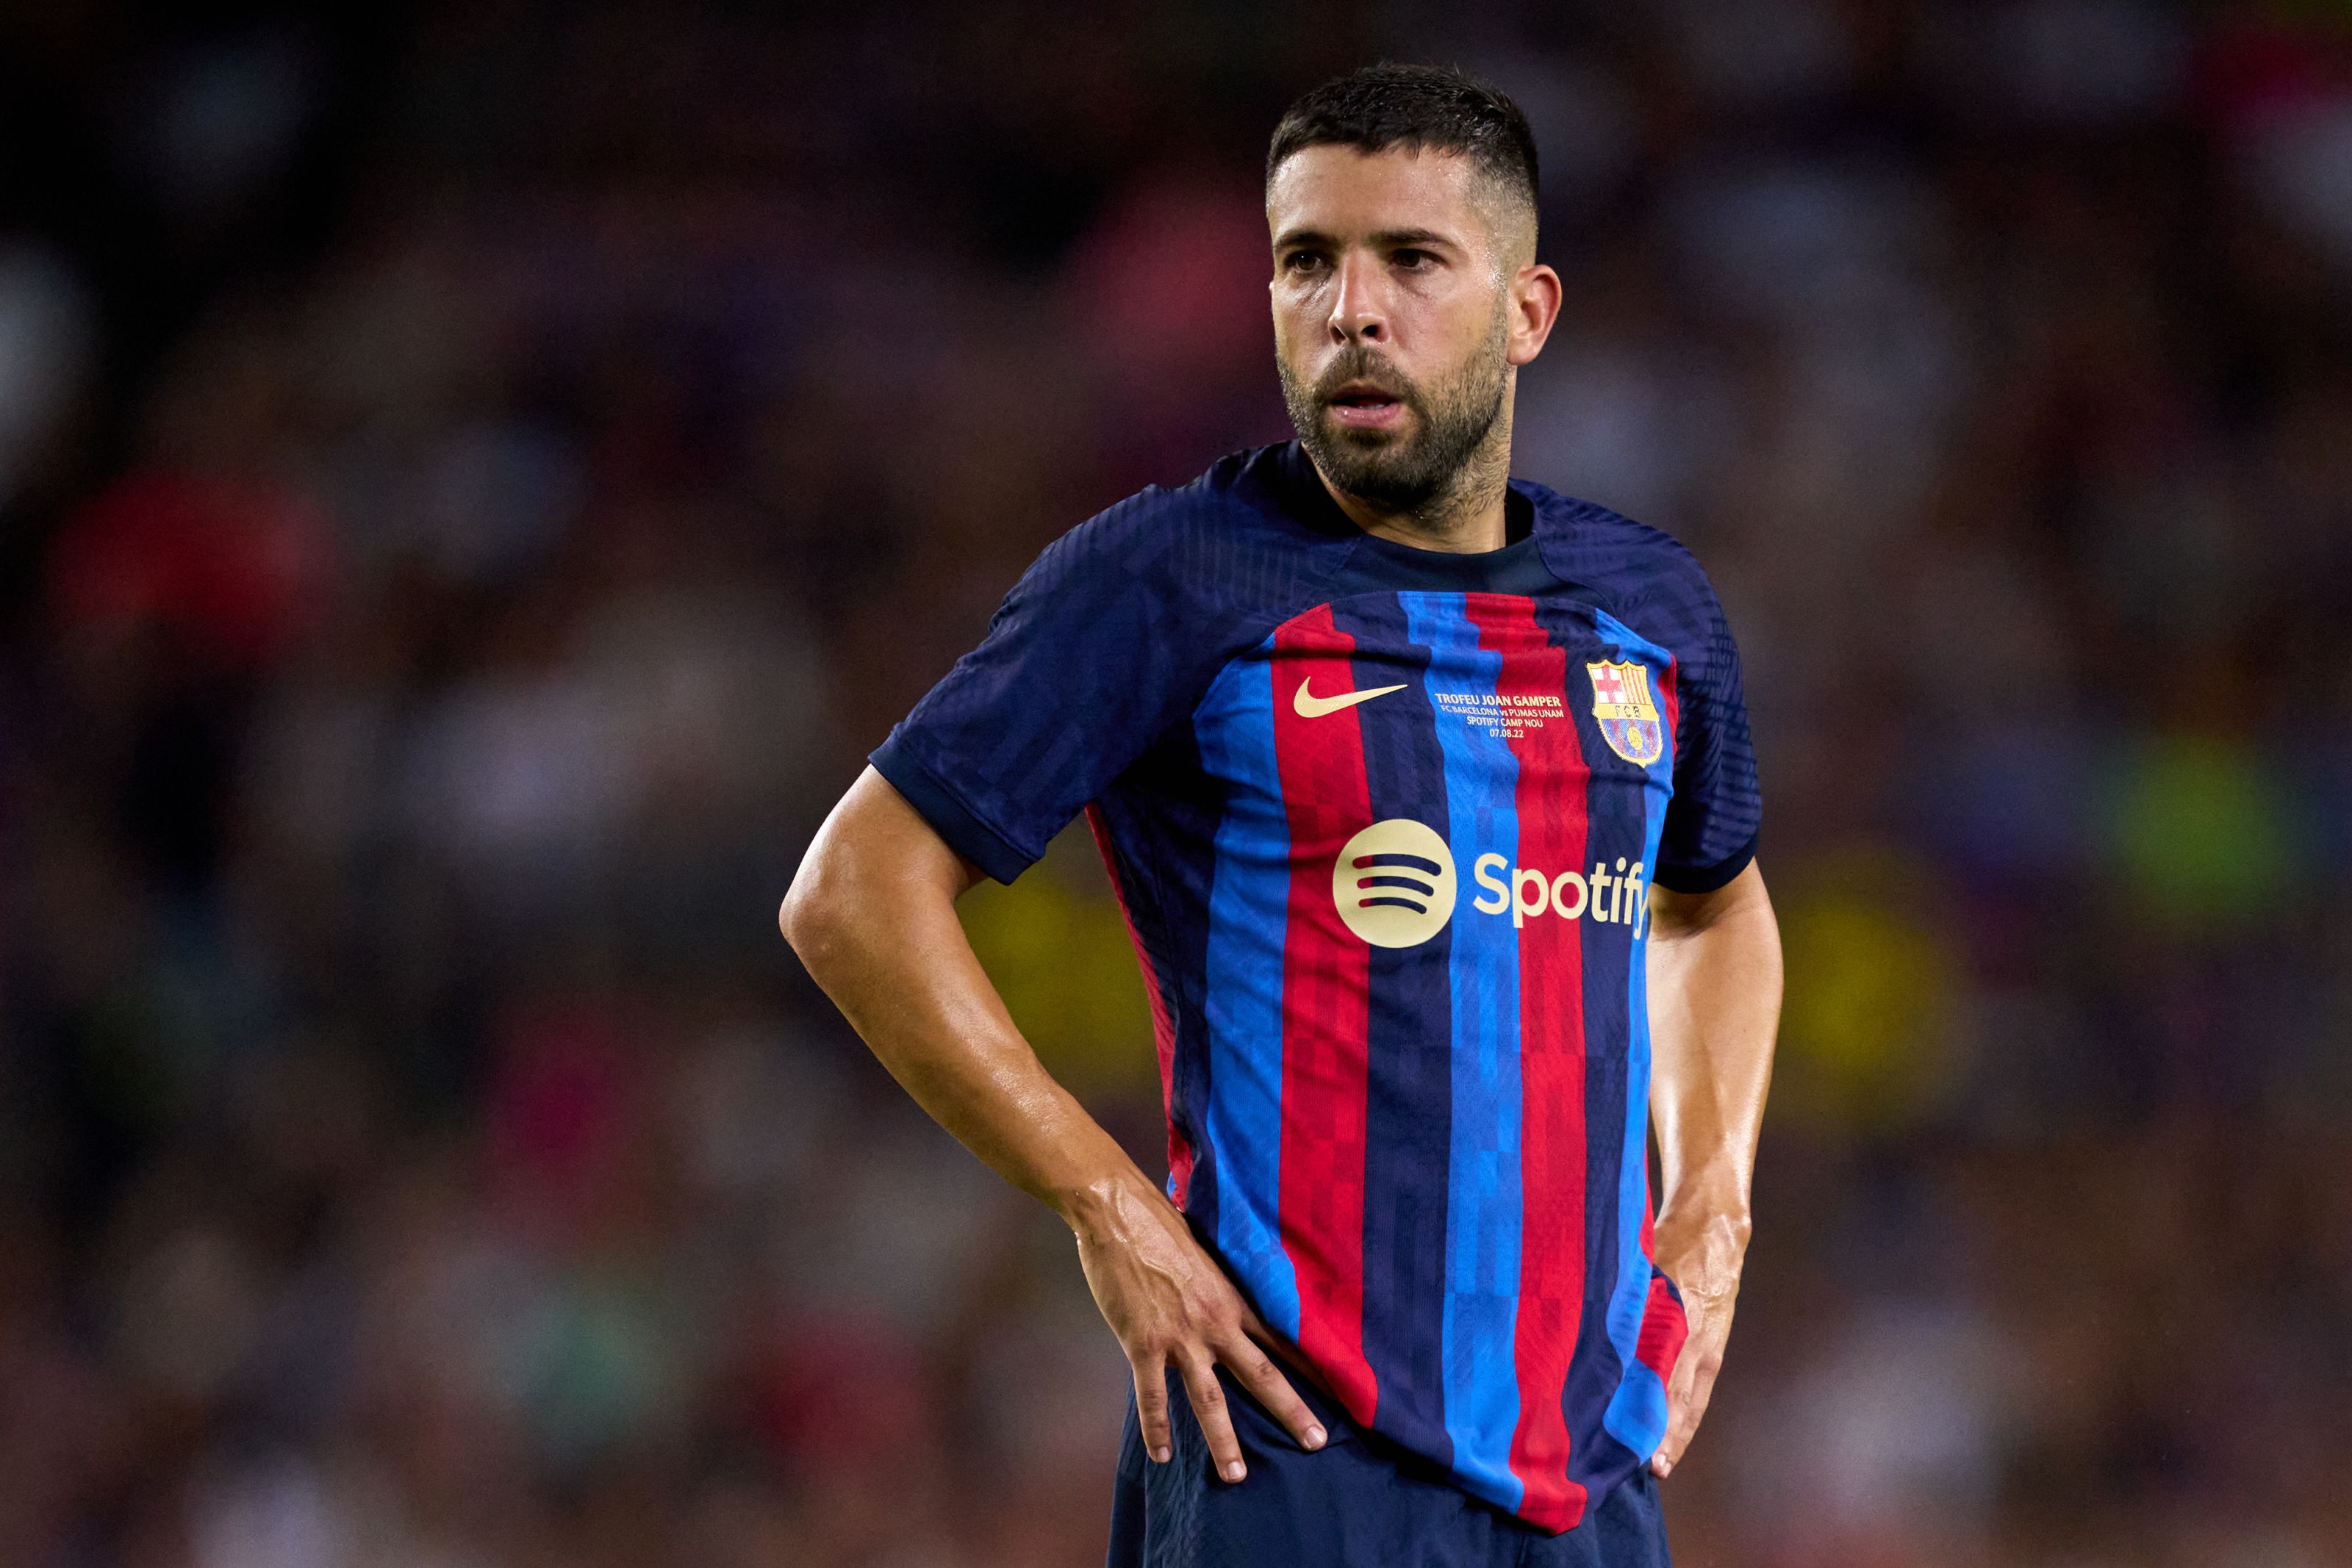 Alba mentions Brazil and Russia World Cups in the context of human rights in Qatar